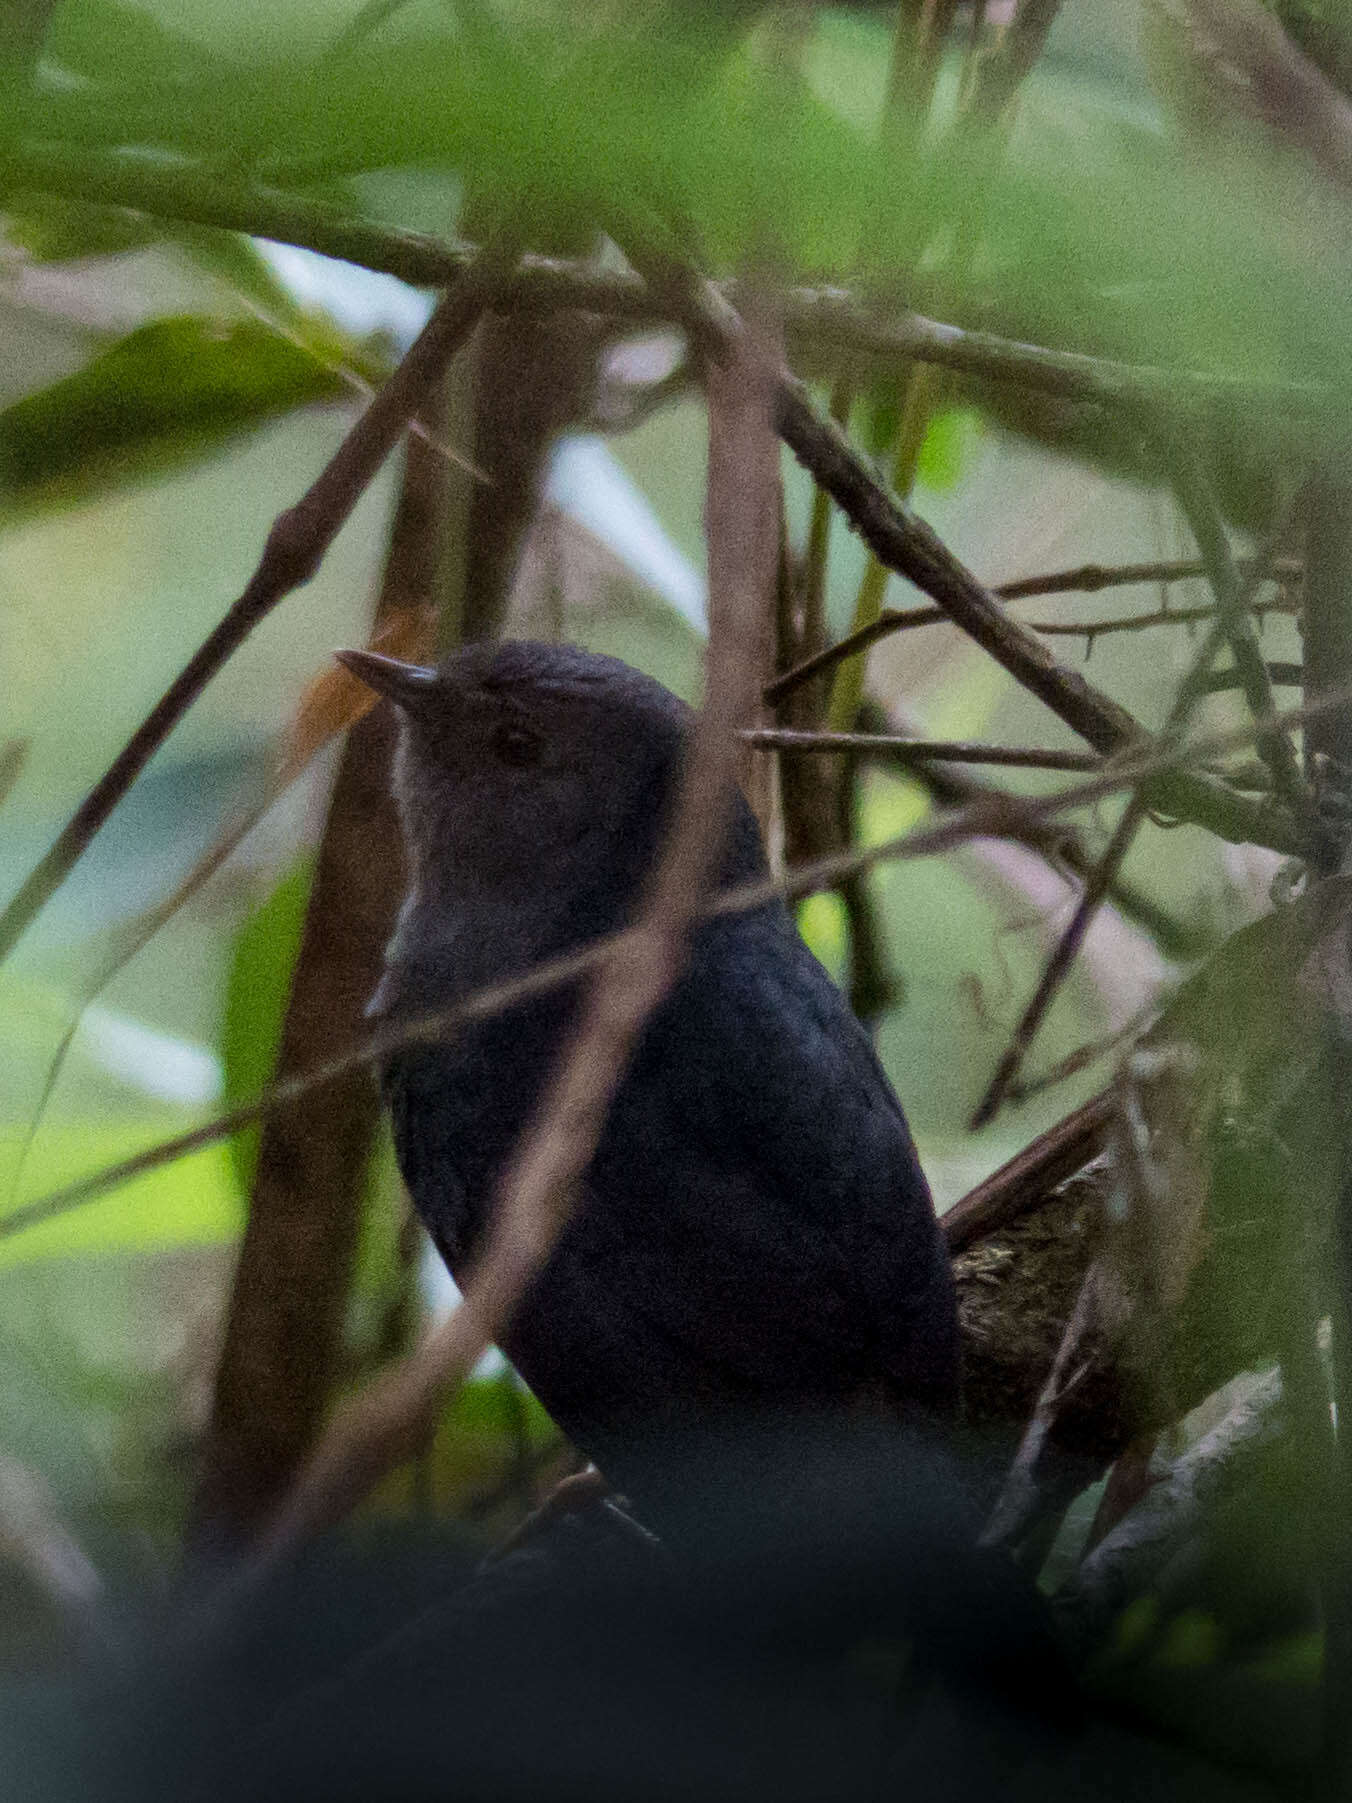 Image of Rock Tapaculo